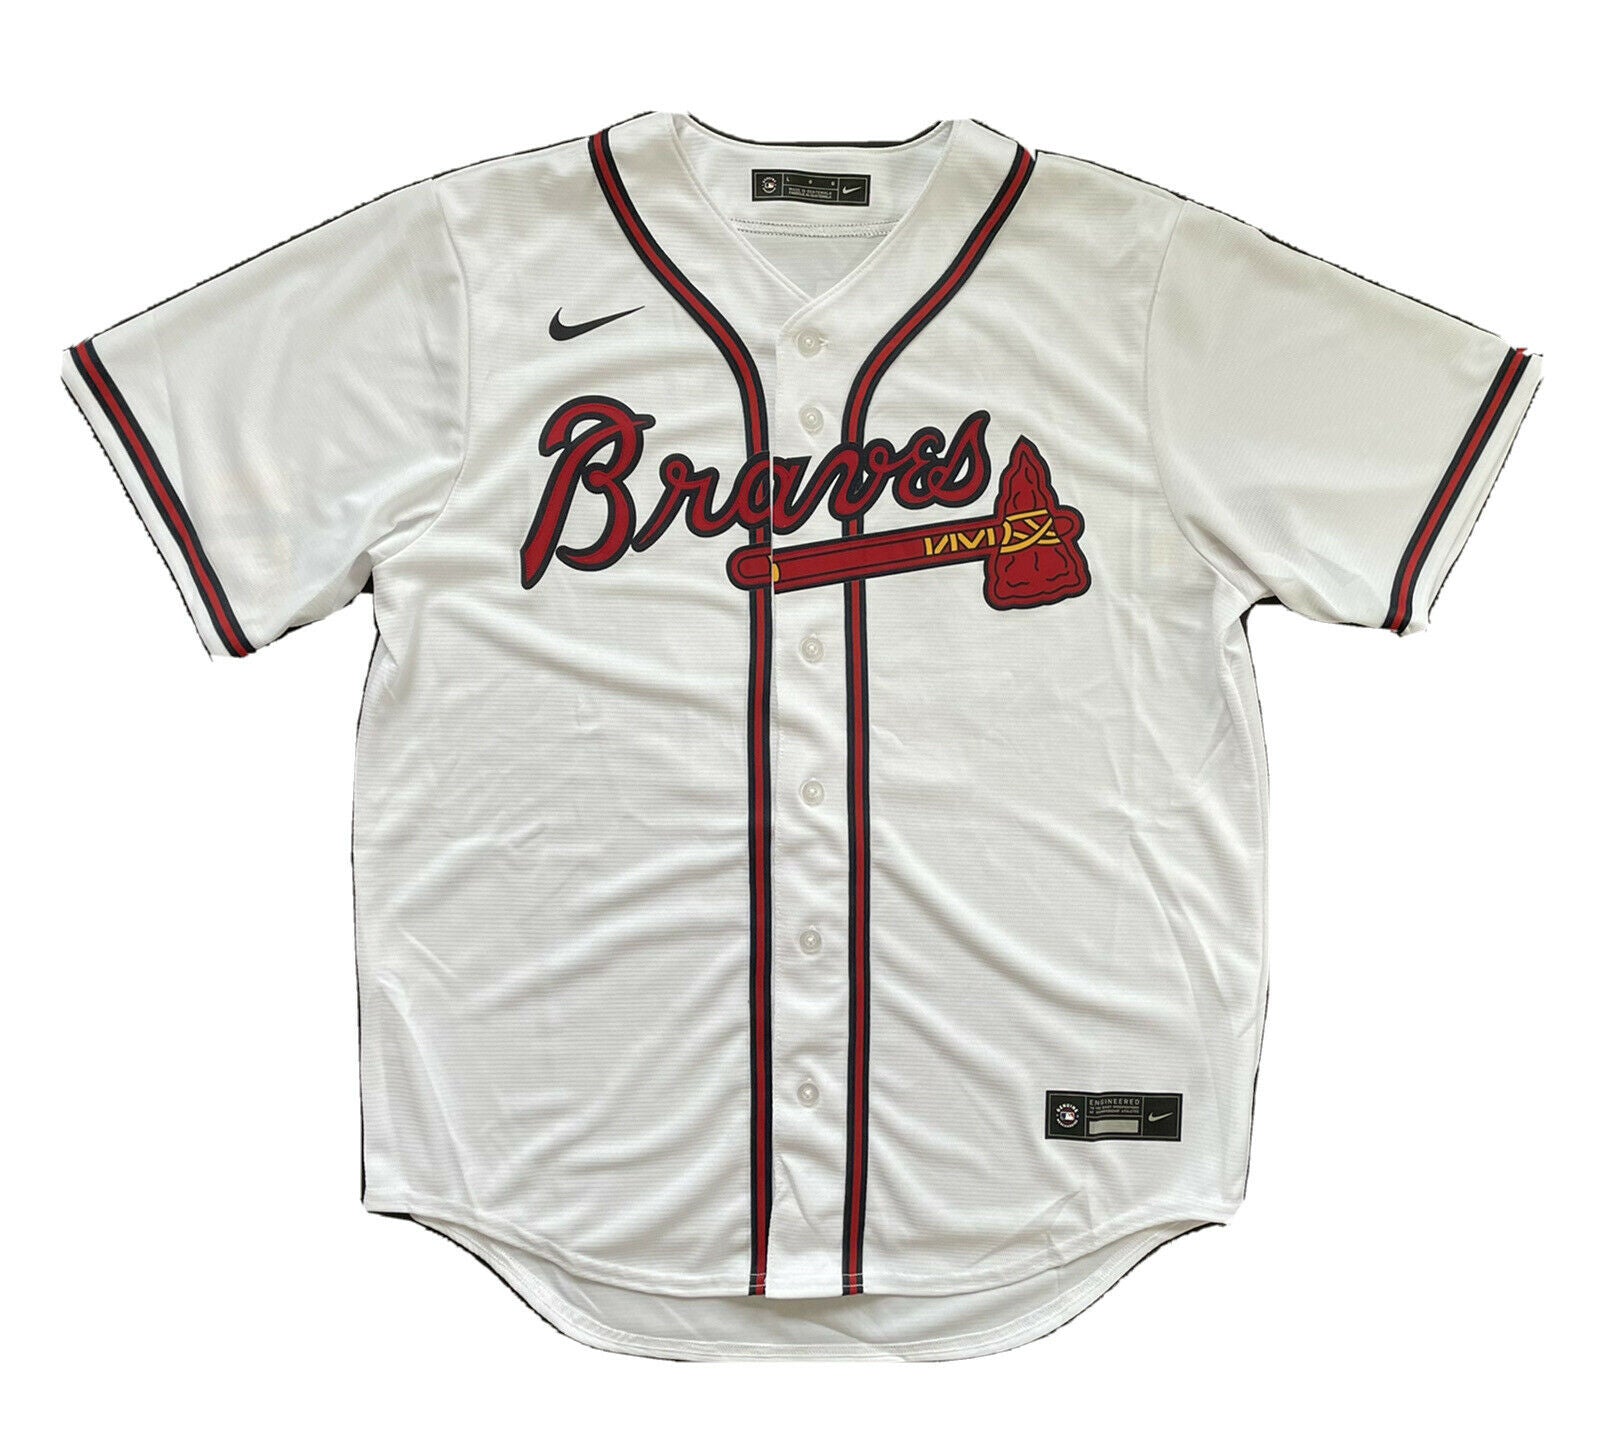 cooperstown throwback jerseys